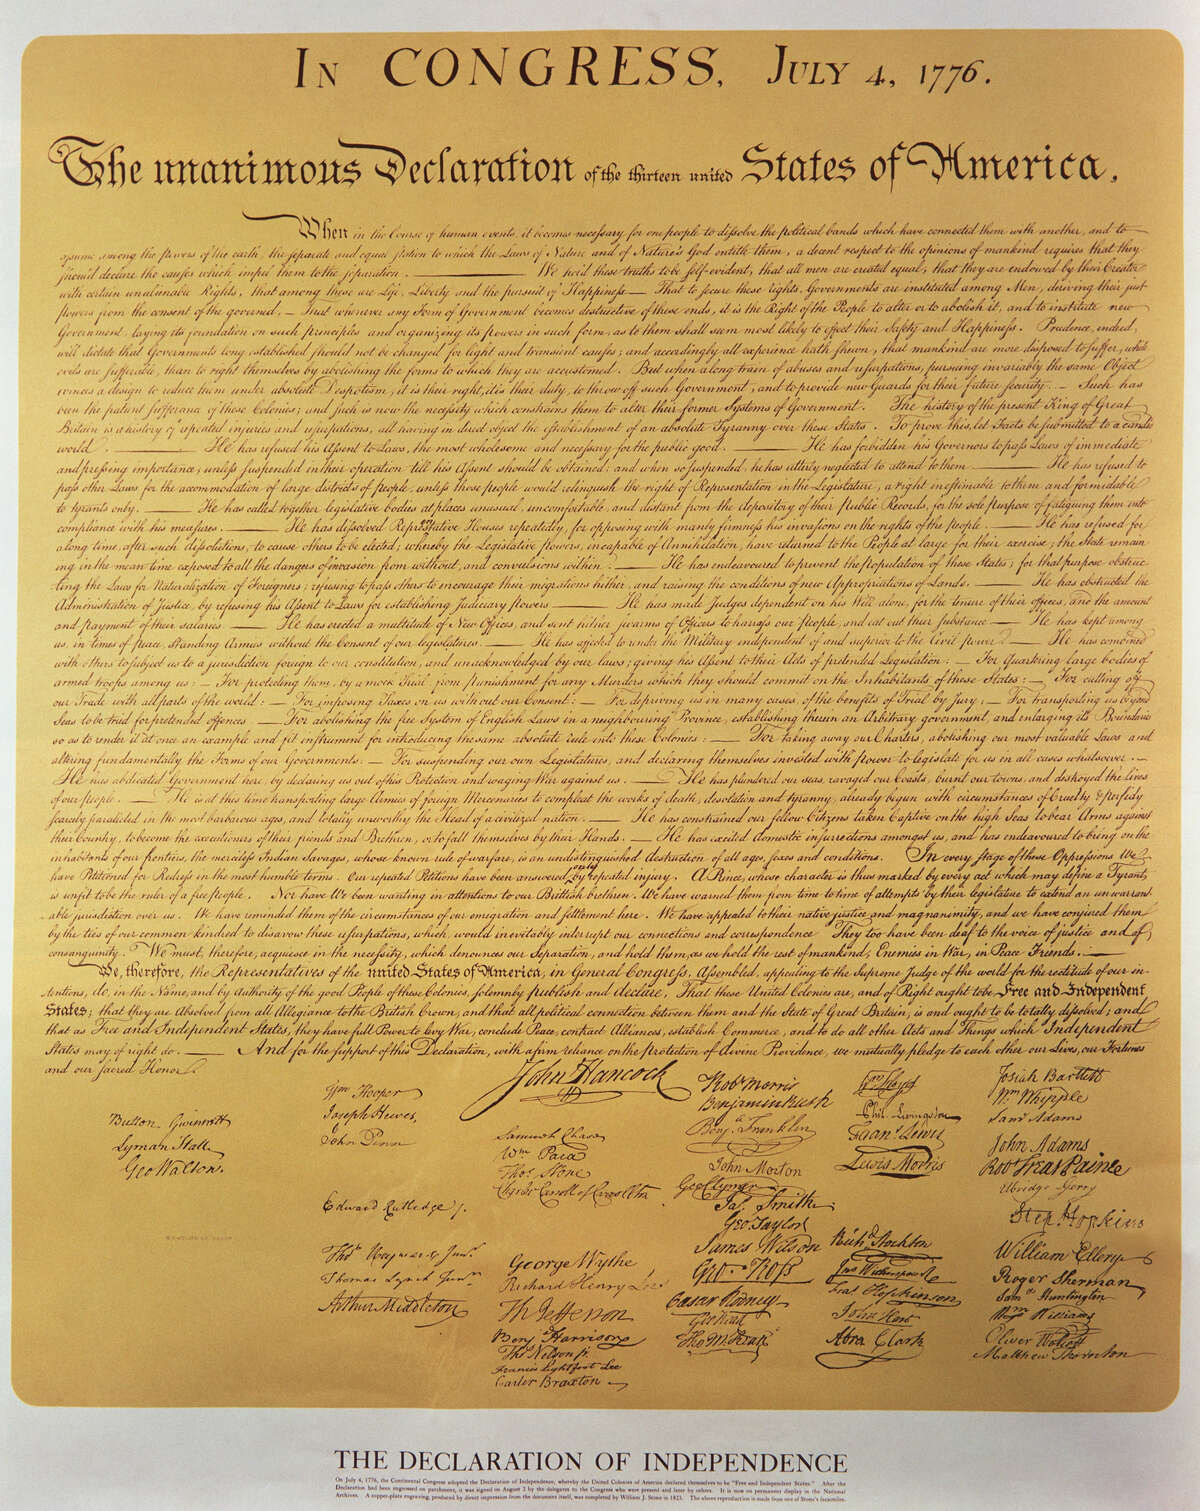 u-s-declaration-of-independence-full-text-what-america-s-founding